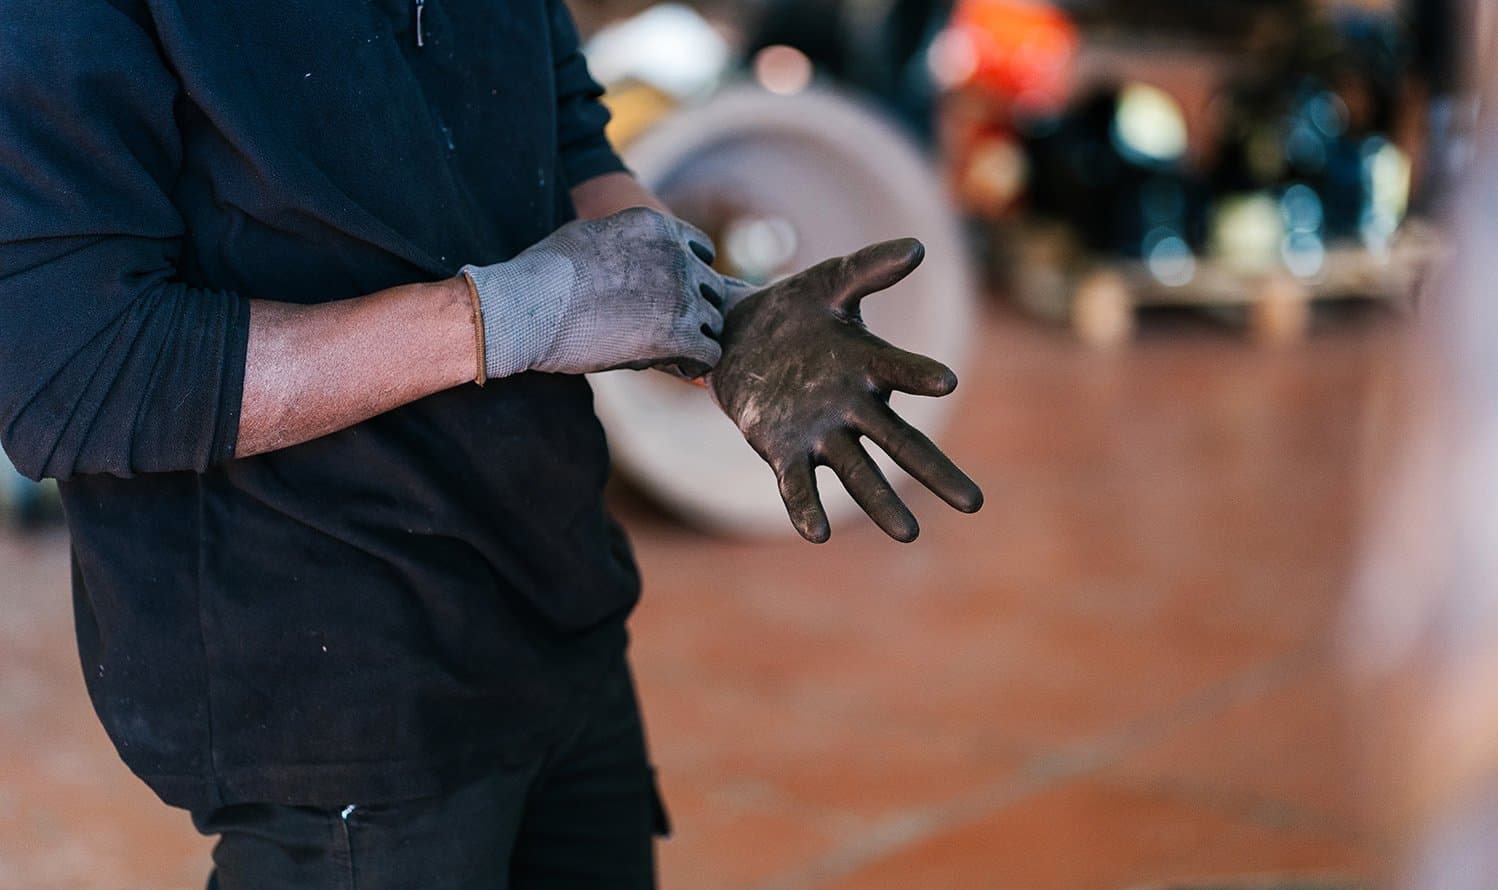 A mechanic puts on gloves.